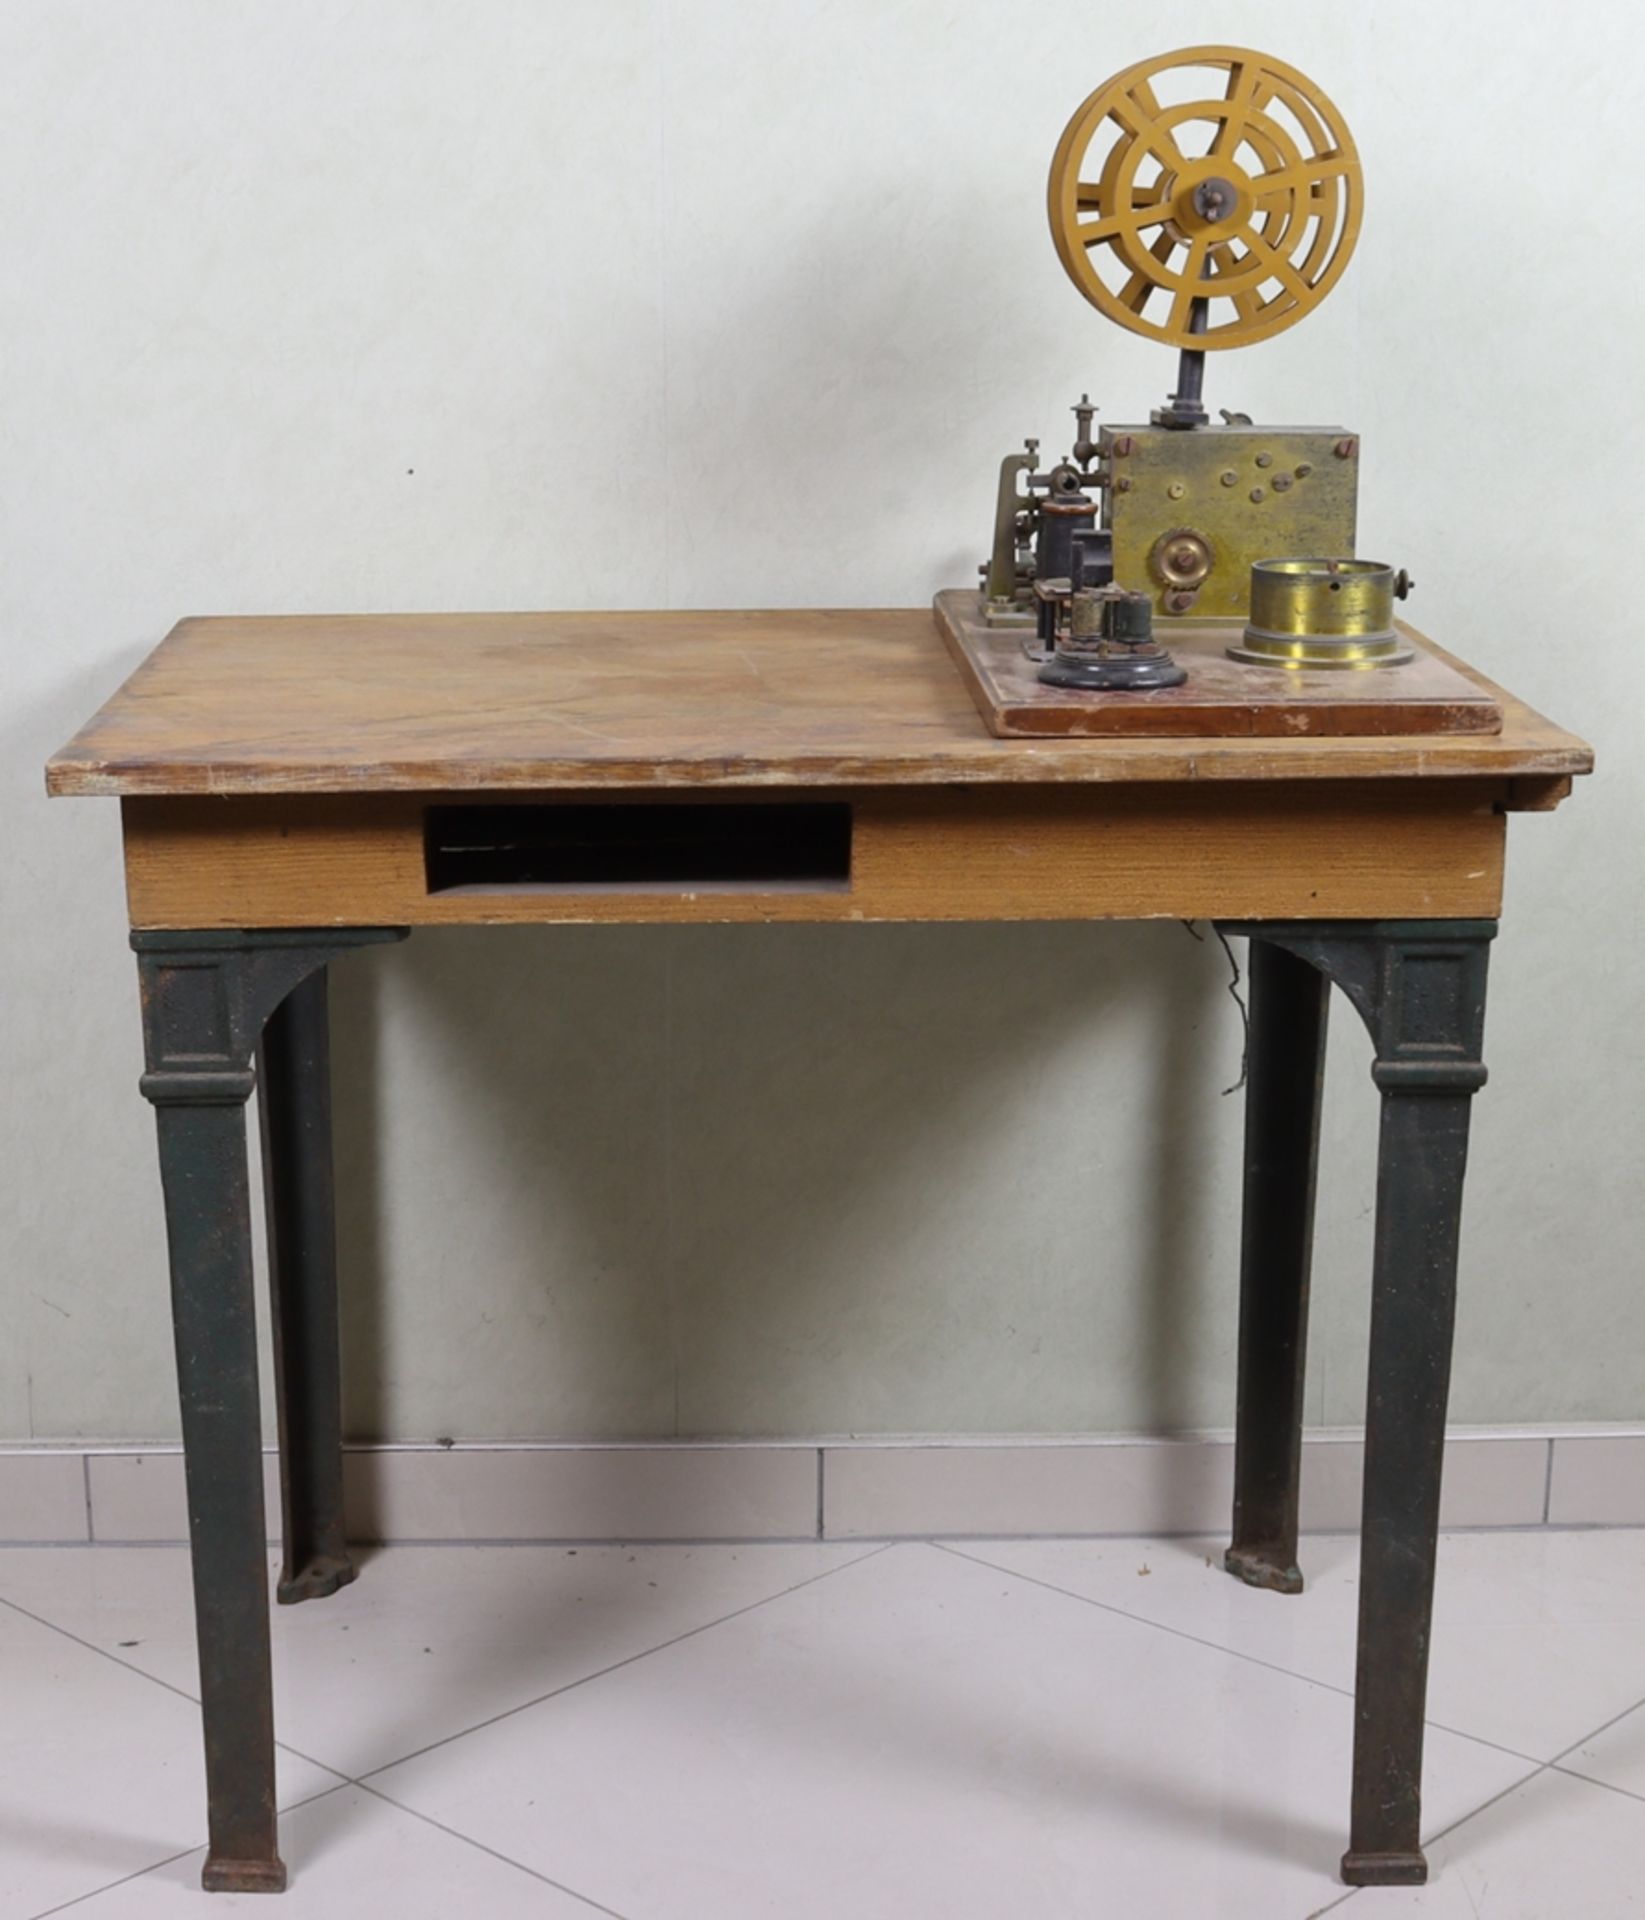 Telegraph apparatus with table, Historicism mid 19th century, German - Image 4 of 8